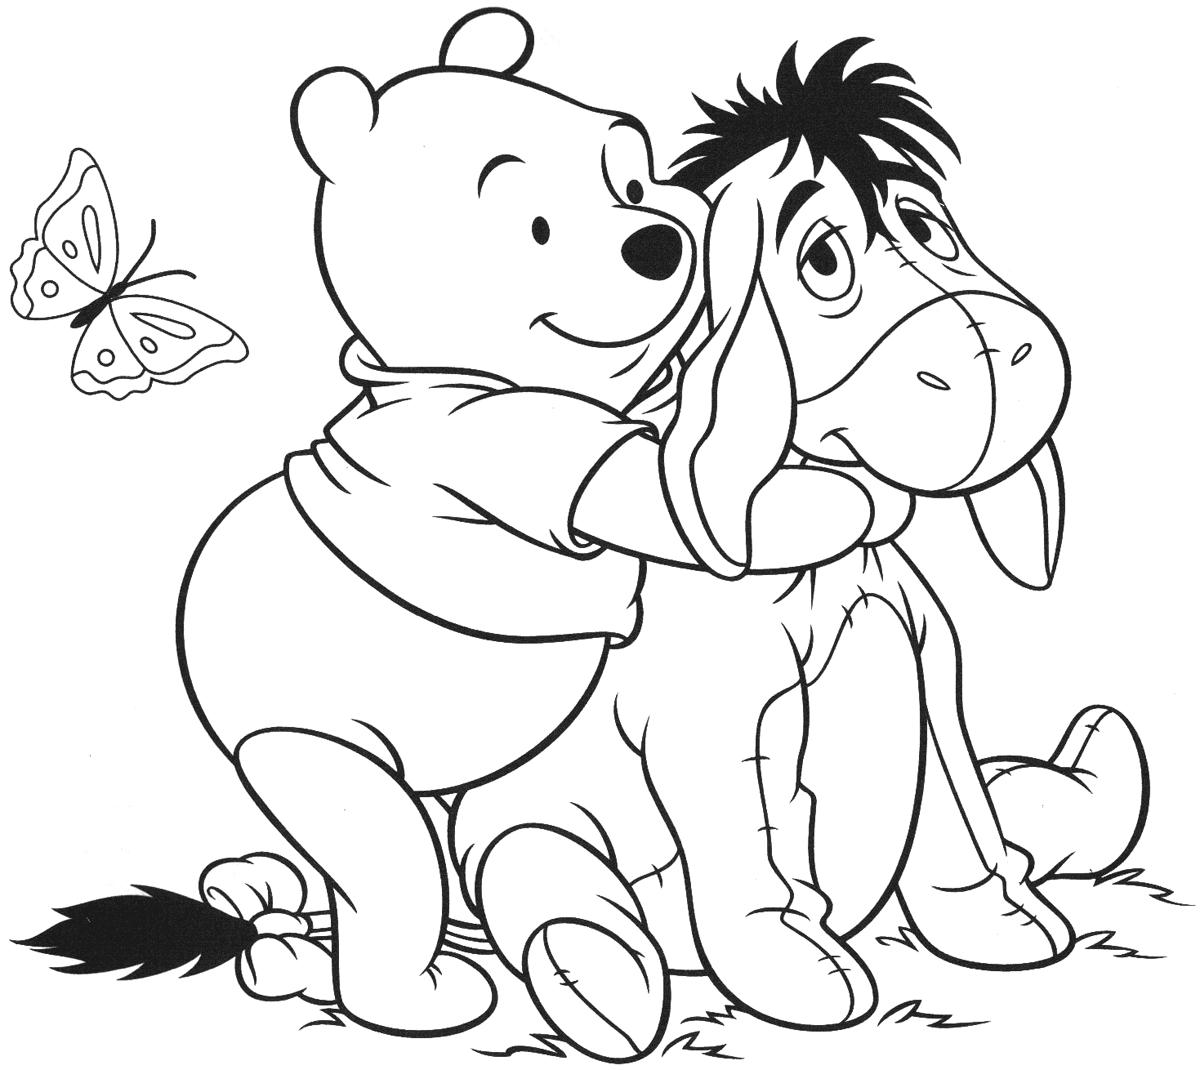 Winnie the Pooh Coloring Pages Cartoons Winnie The Pooh and Friends Sheets Printable 2020 7061 Coloring4free